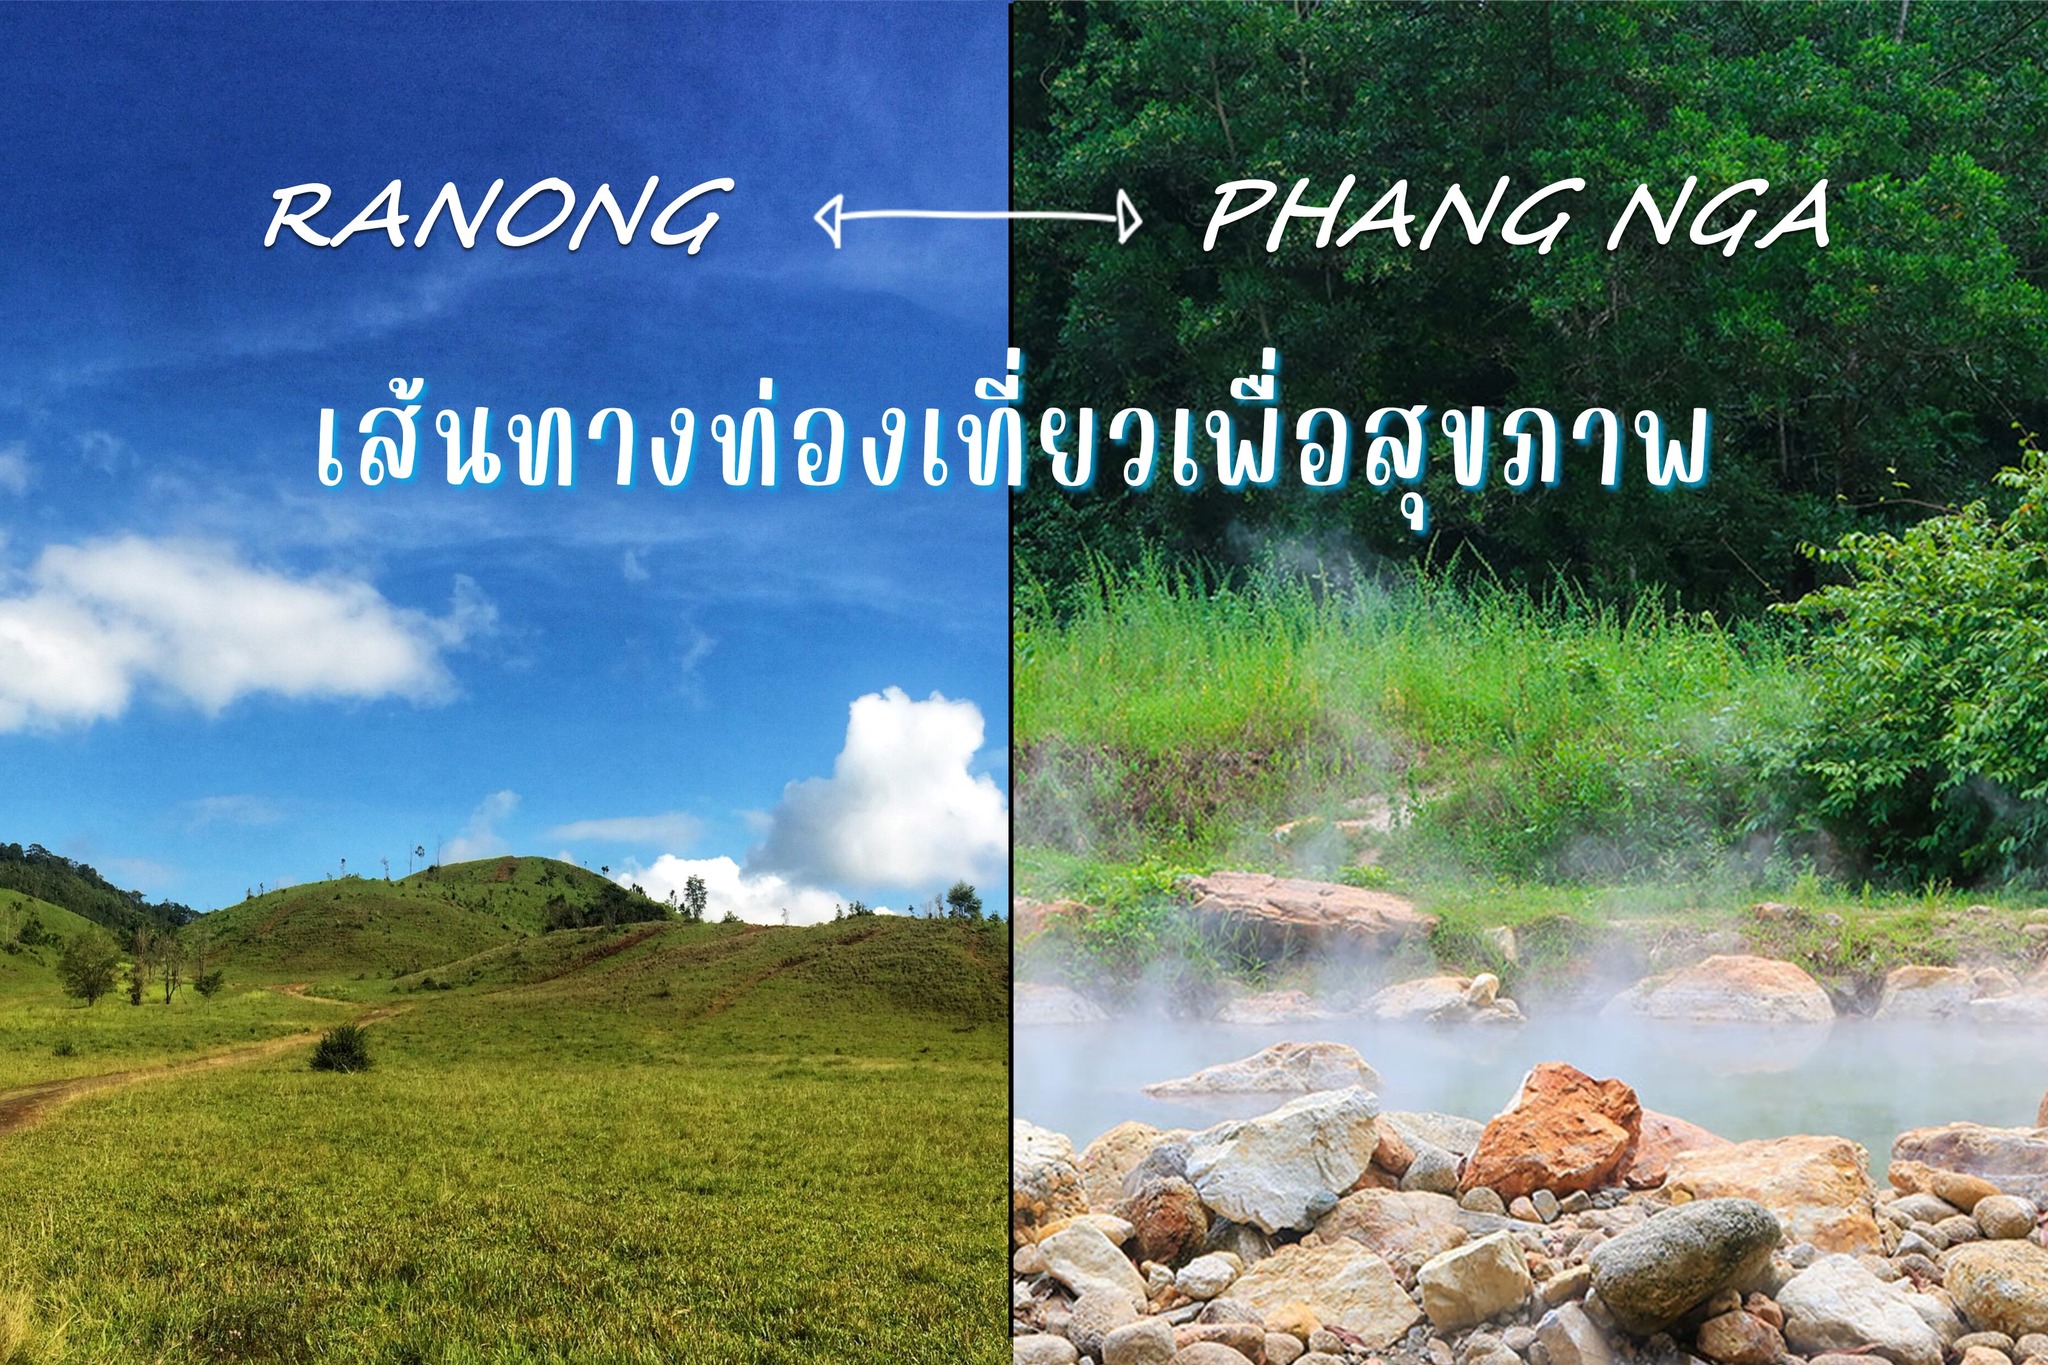 The Phang Nga-Ranong health tourism route is open 365 days a year.